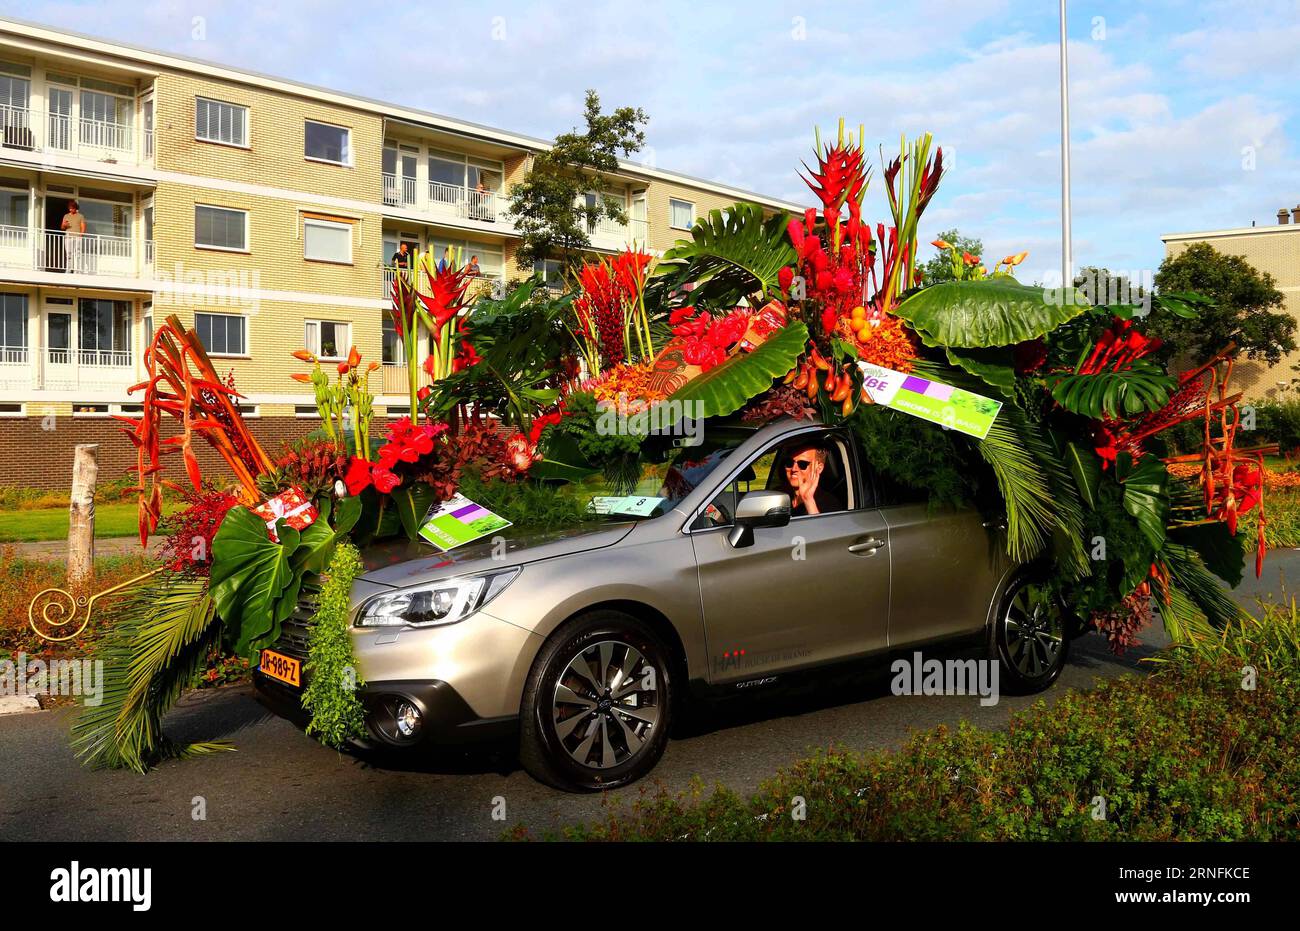 Blumenparade in Noordwijk (160814) -- THE HAGUE, Aug. 13, 2016 -- A float is seen during the Flower Parade in Noordwijk, the Netherlands, on Aug. 13, 2016. The annual Flower Parade since 1946 was held in Rijnsburg, Katwijk and Noordwijk of the Nehterlands on Saturday. ) (syq) NETHERLANDS-NOORDWIJK-FLOWER PARADE GongxBing PUBLICATIONxNOTxINxCHN   Flowers Parade in Noordwijk 160814 The Hague Aug 13 2016 a Float IS Lakes during The Flower Parade in Noordwijk The Netherlands ON Aug 13 2016 The Annual Flower Parade Since 1946 what Hero in Rijnsburg Katwijk and Noordwijk of The Nehterlands ON Saturd Stock Photo